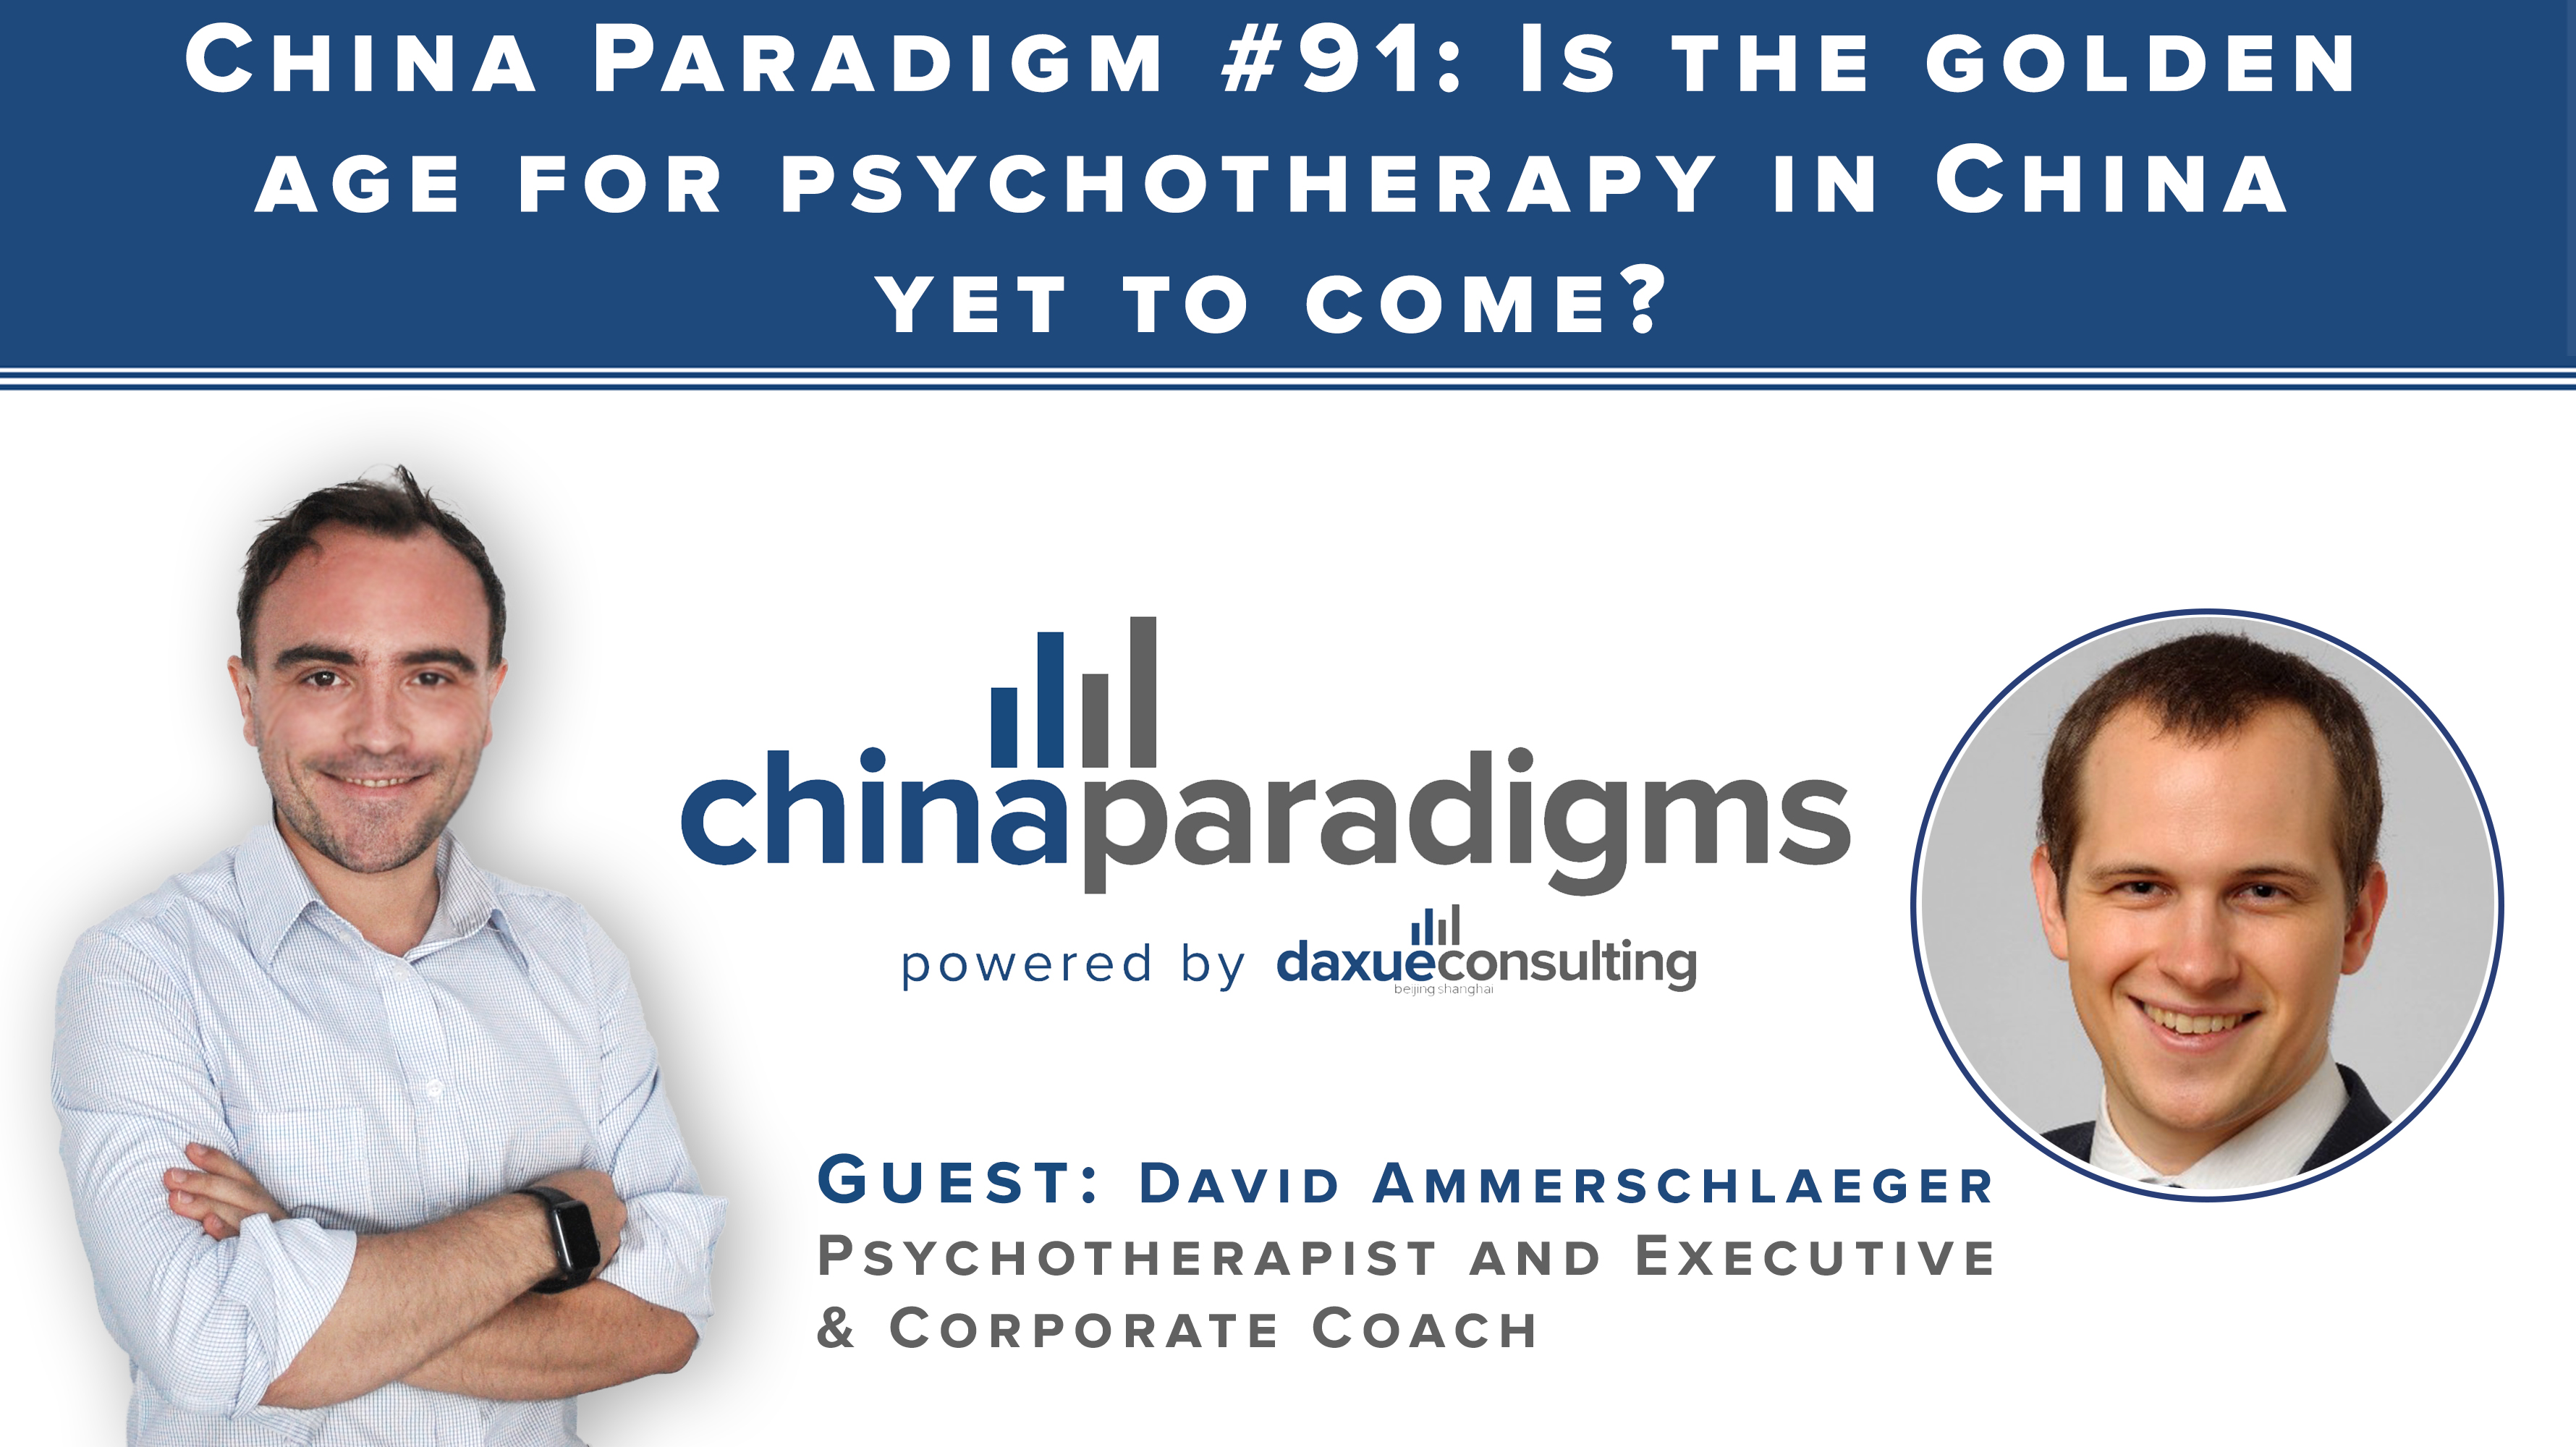 China Paradigm 91: Is the golden age for psychotherapy in China yet to come?